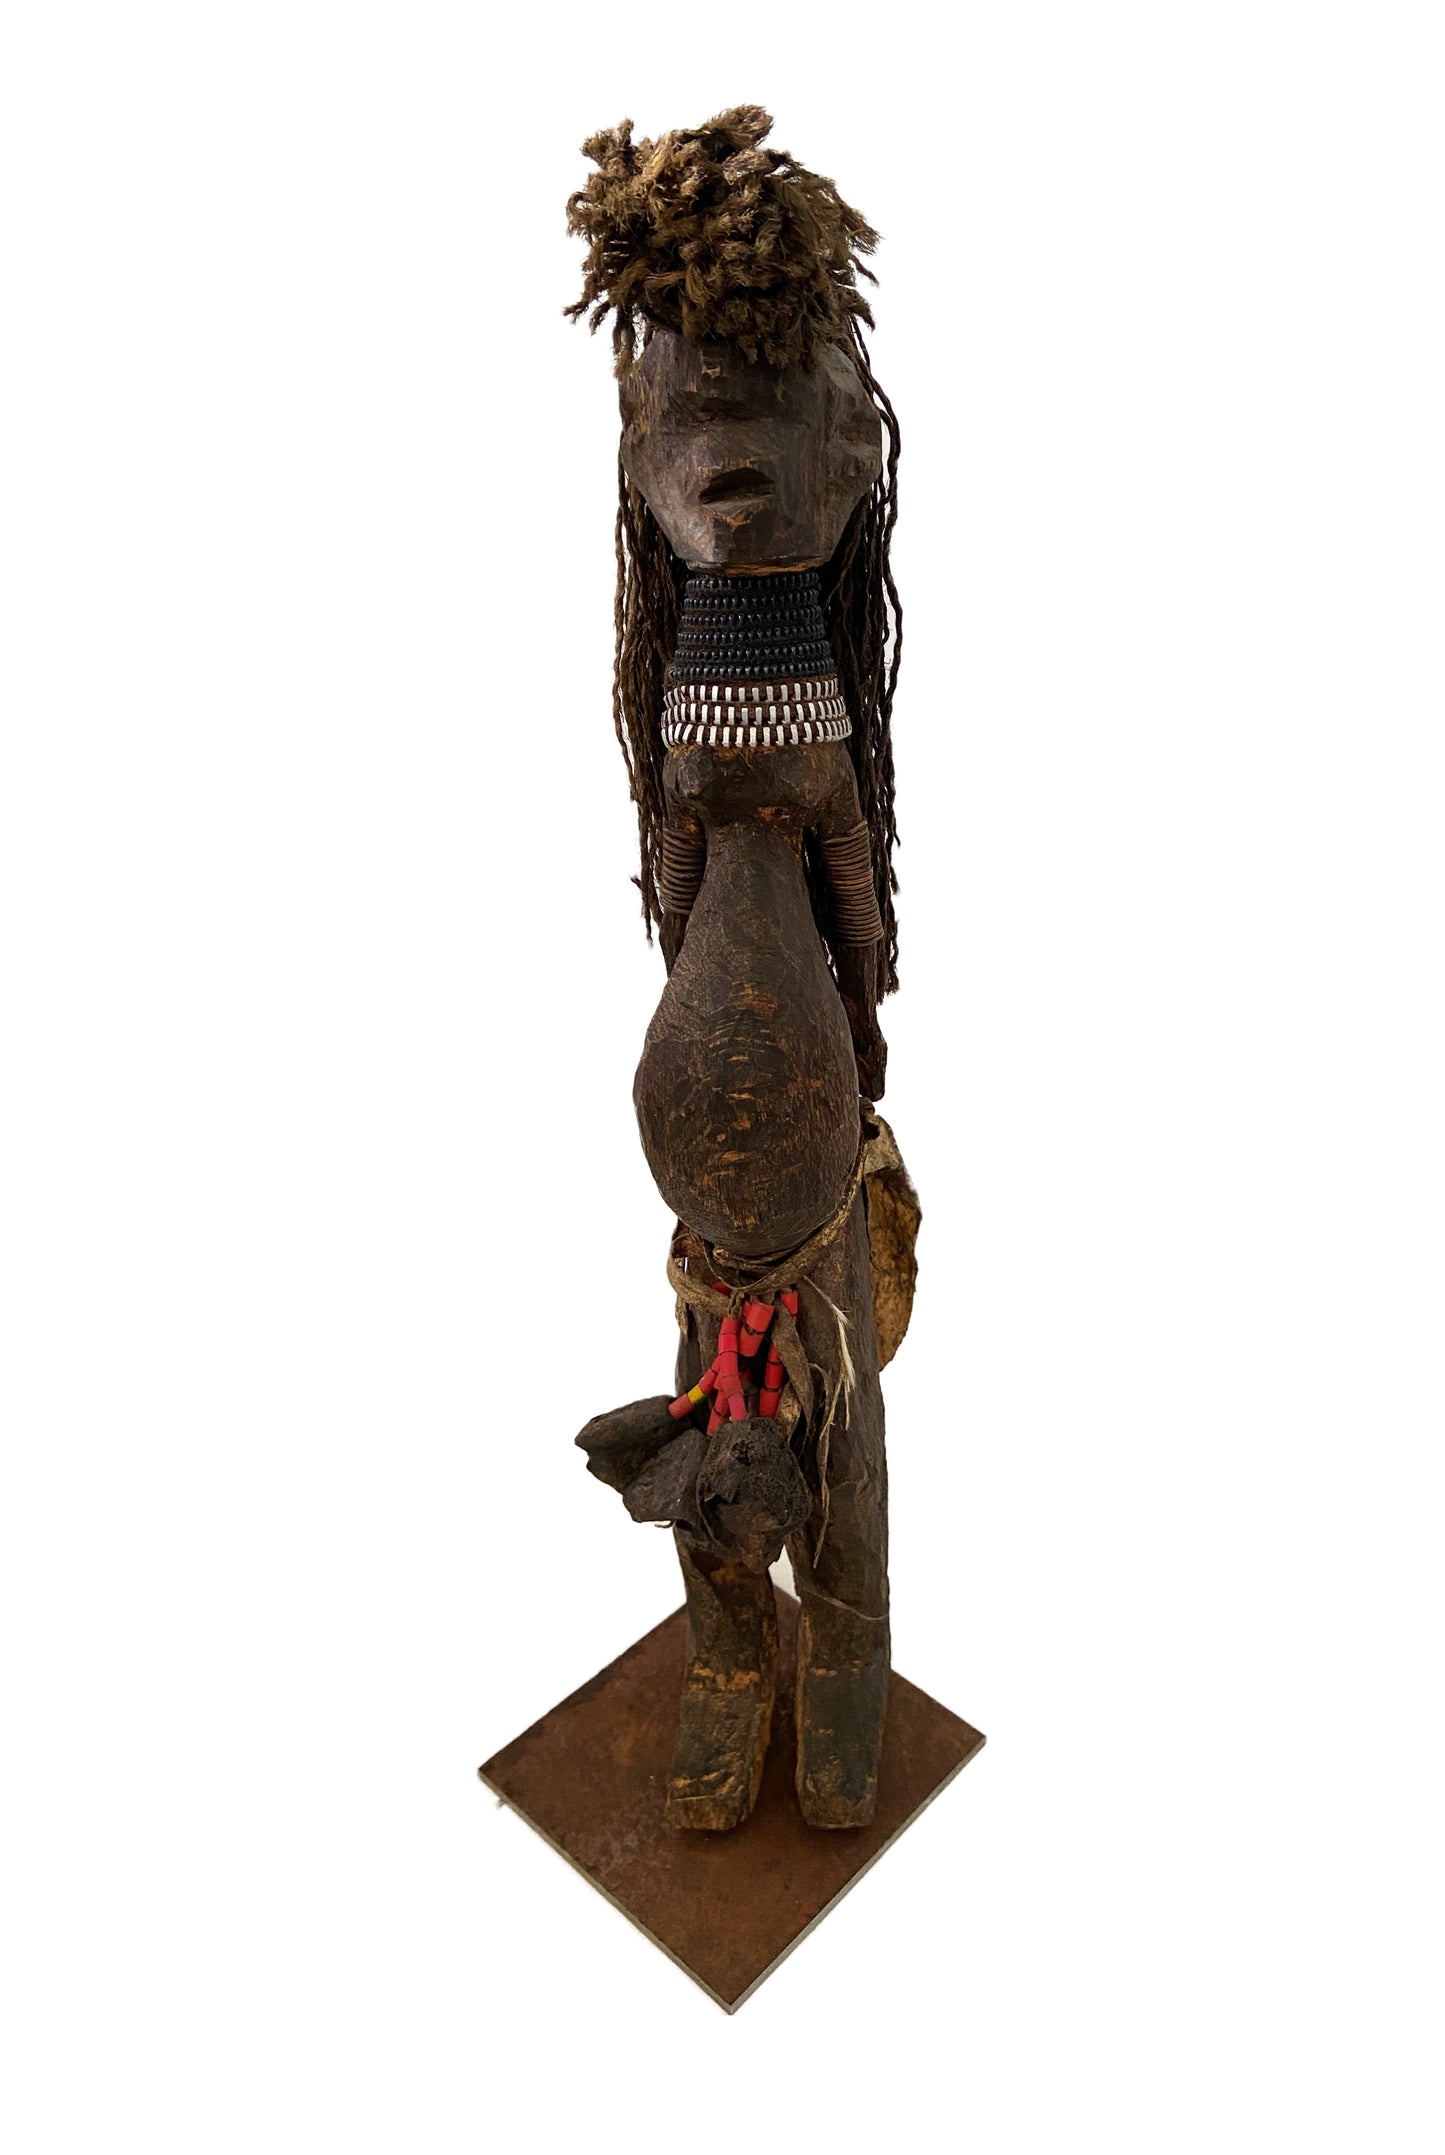 #3083 Old African Fetish female Figure Statue Congo 14" H